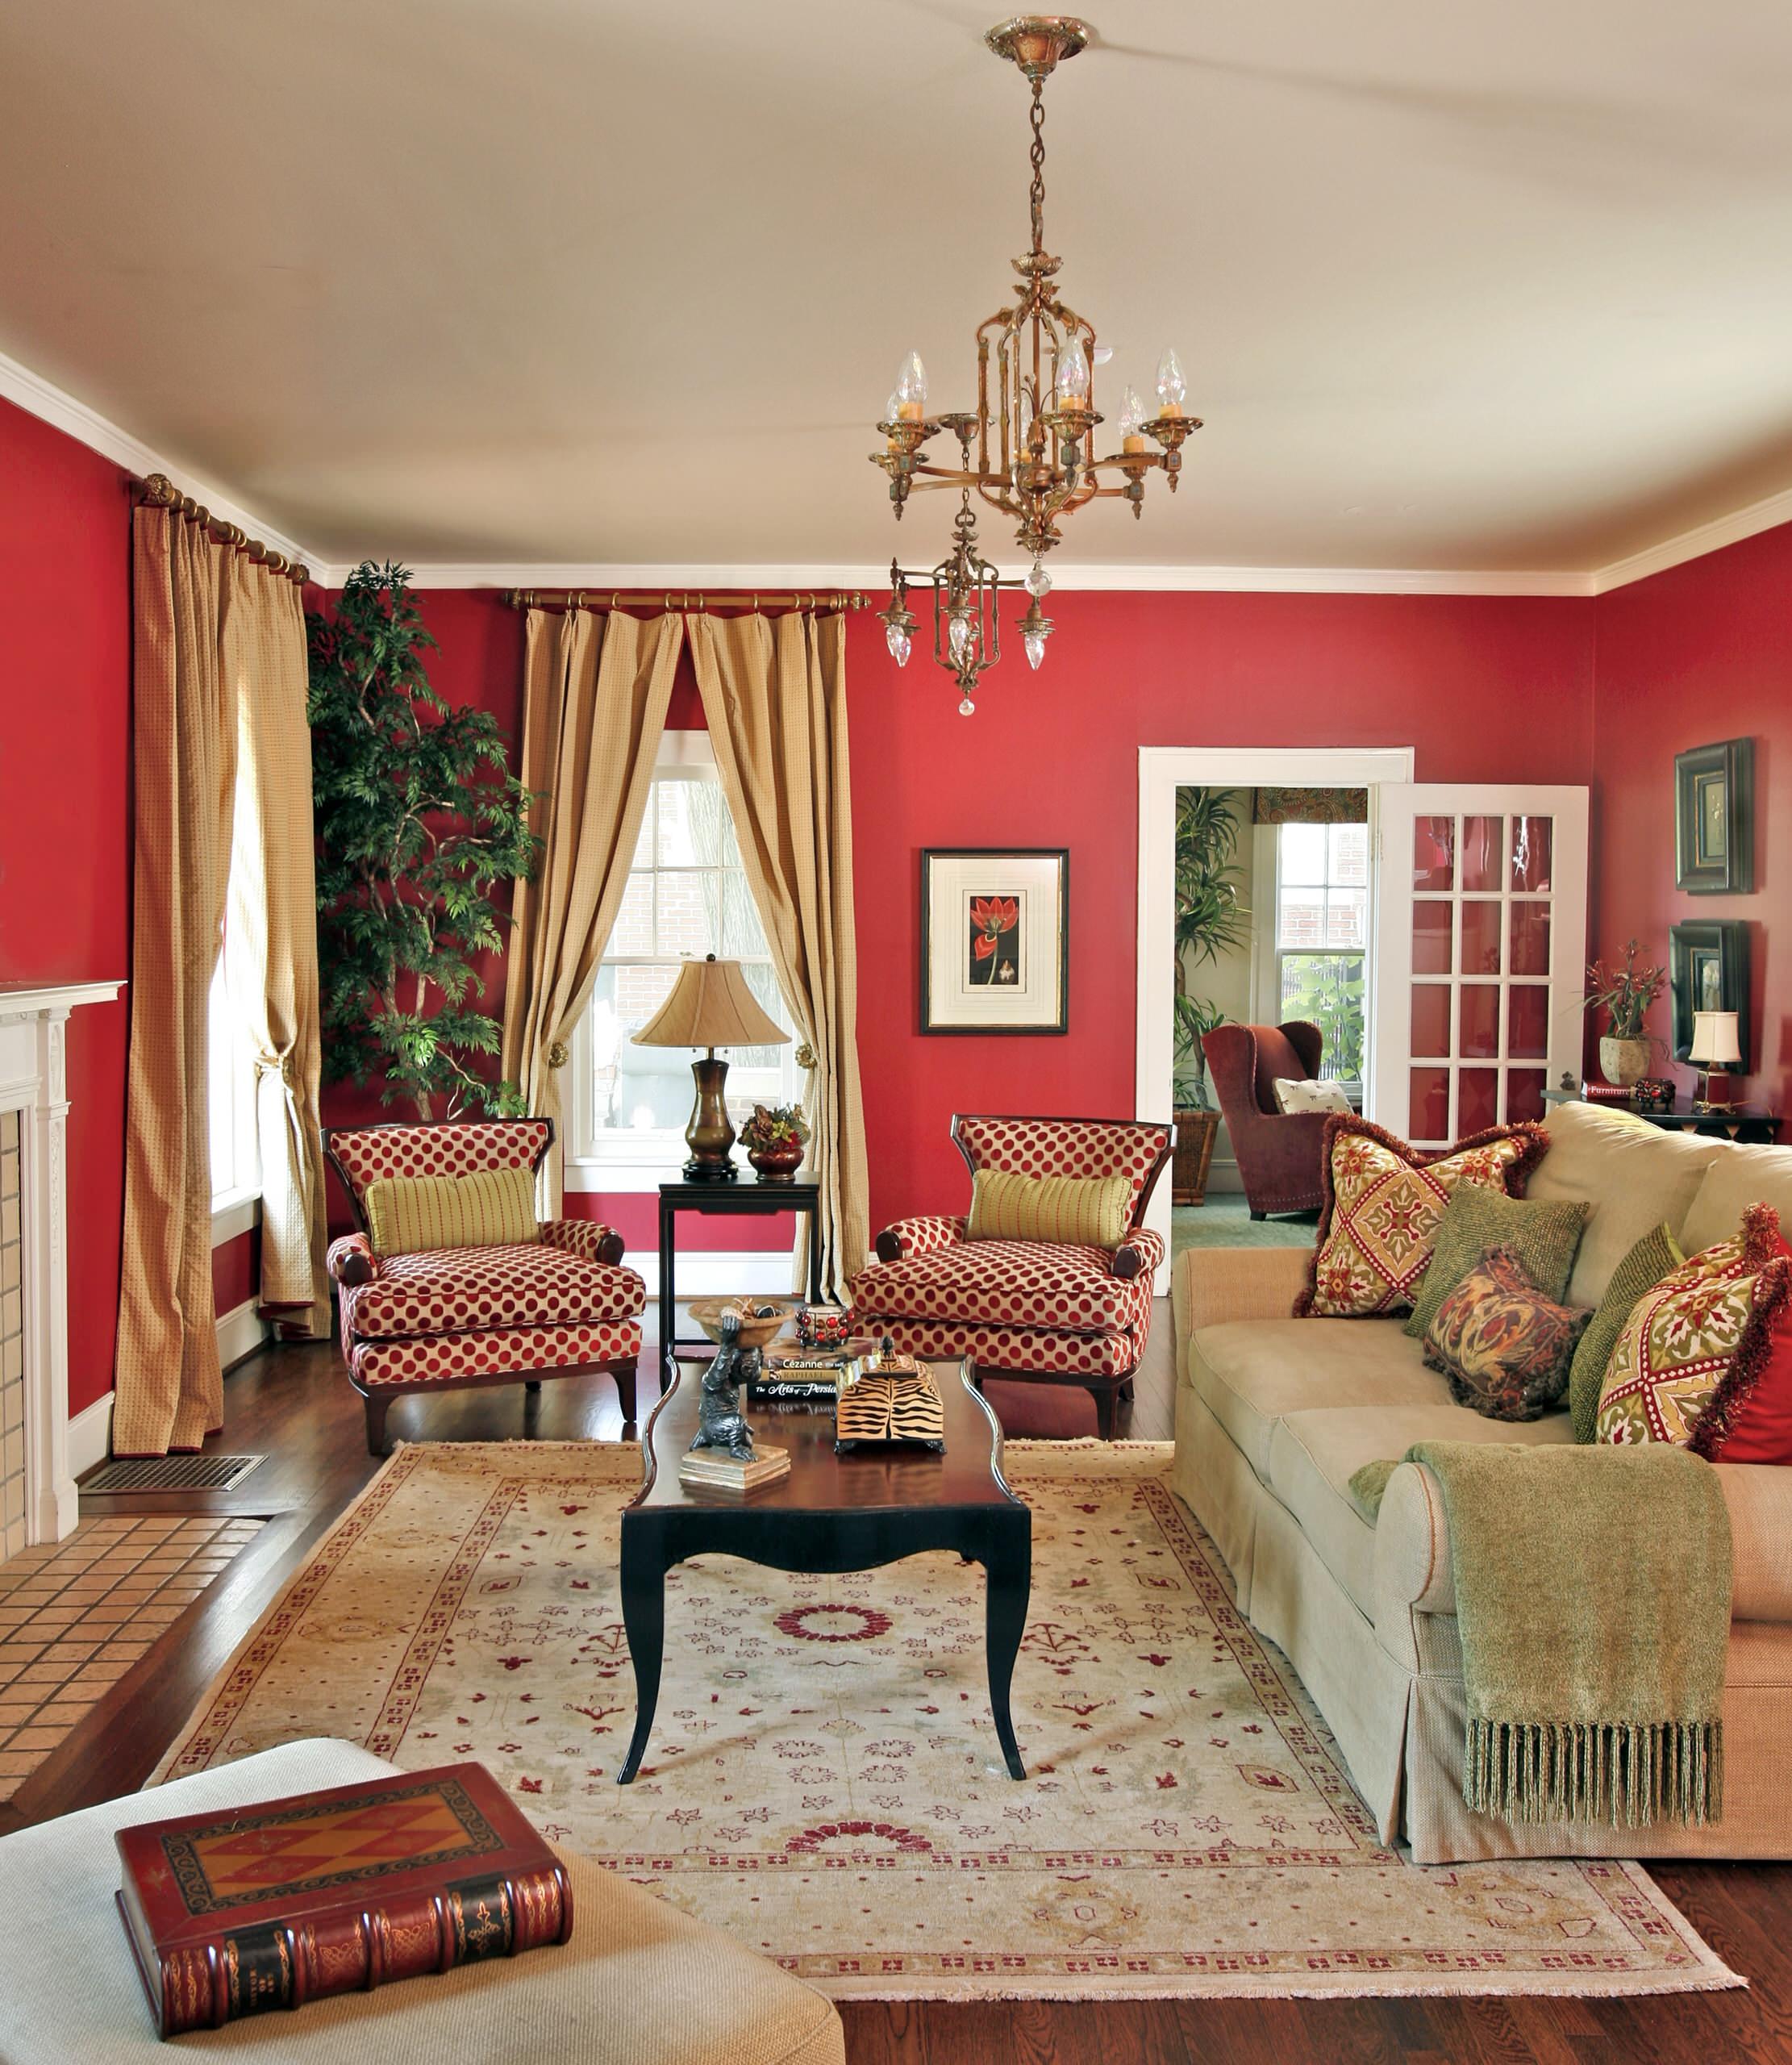 Rooms with Red Walls - Red Bedroom and Living Room Ideas